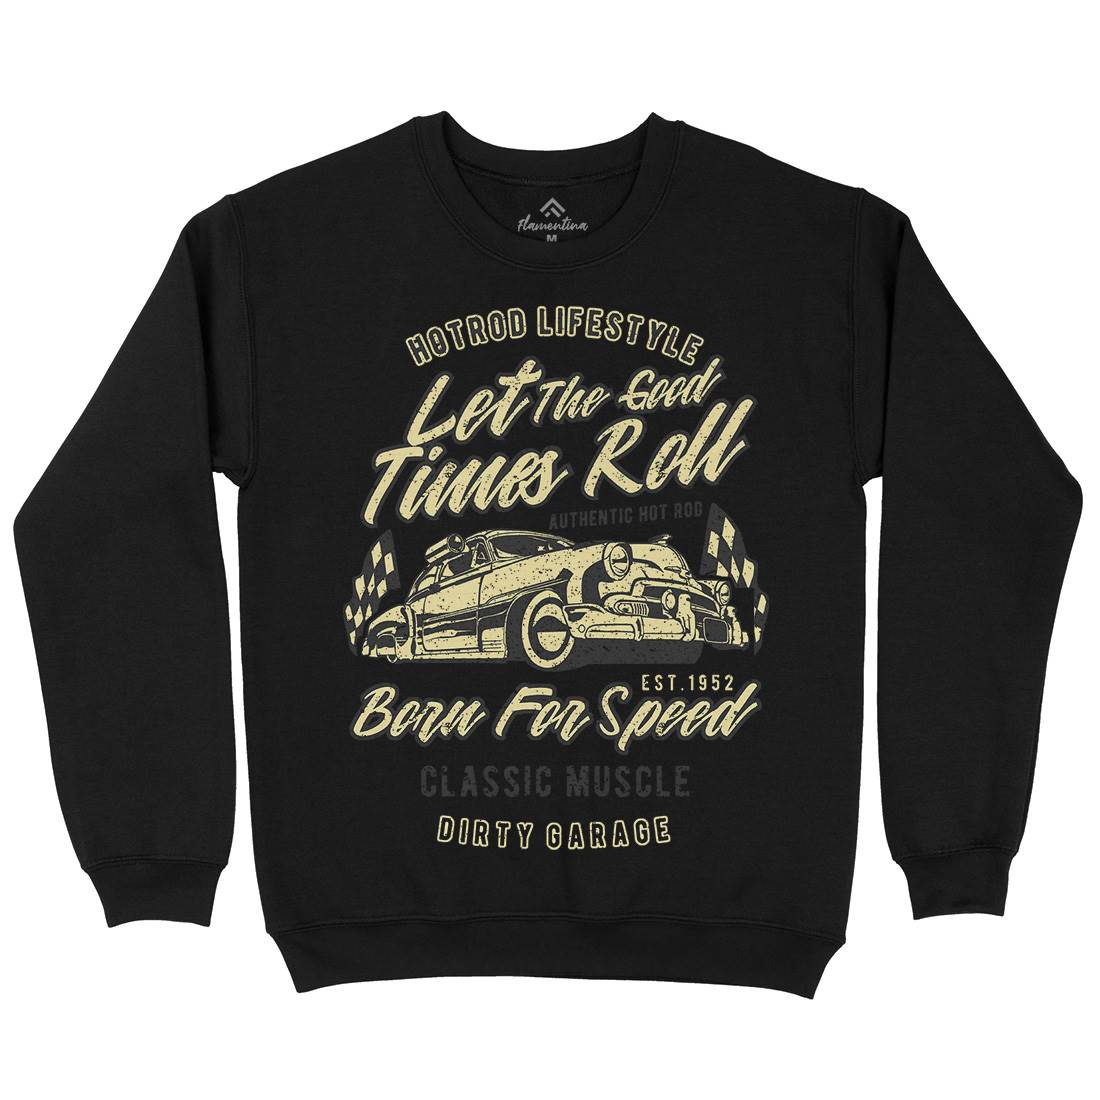 Let The Good Times Roll Kids Crew Neck Sweatshirt Cars A705